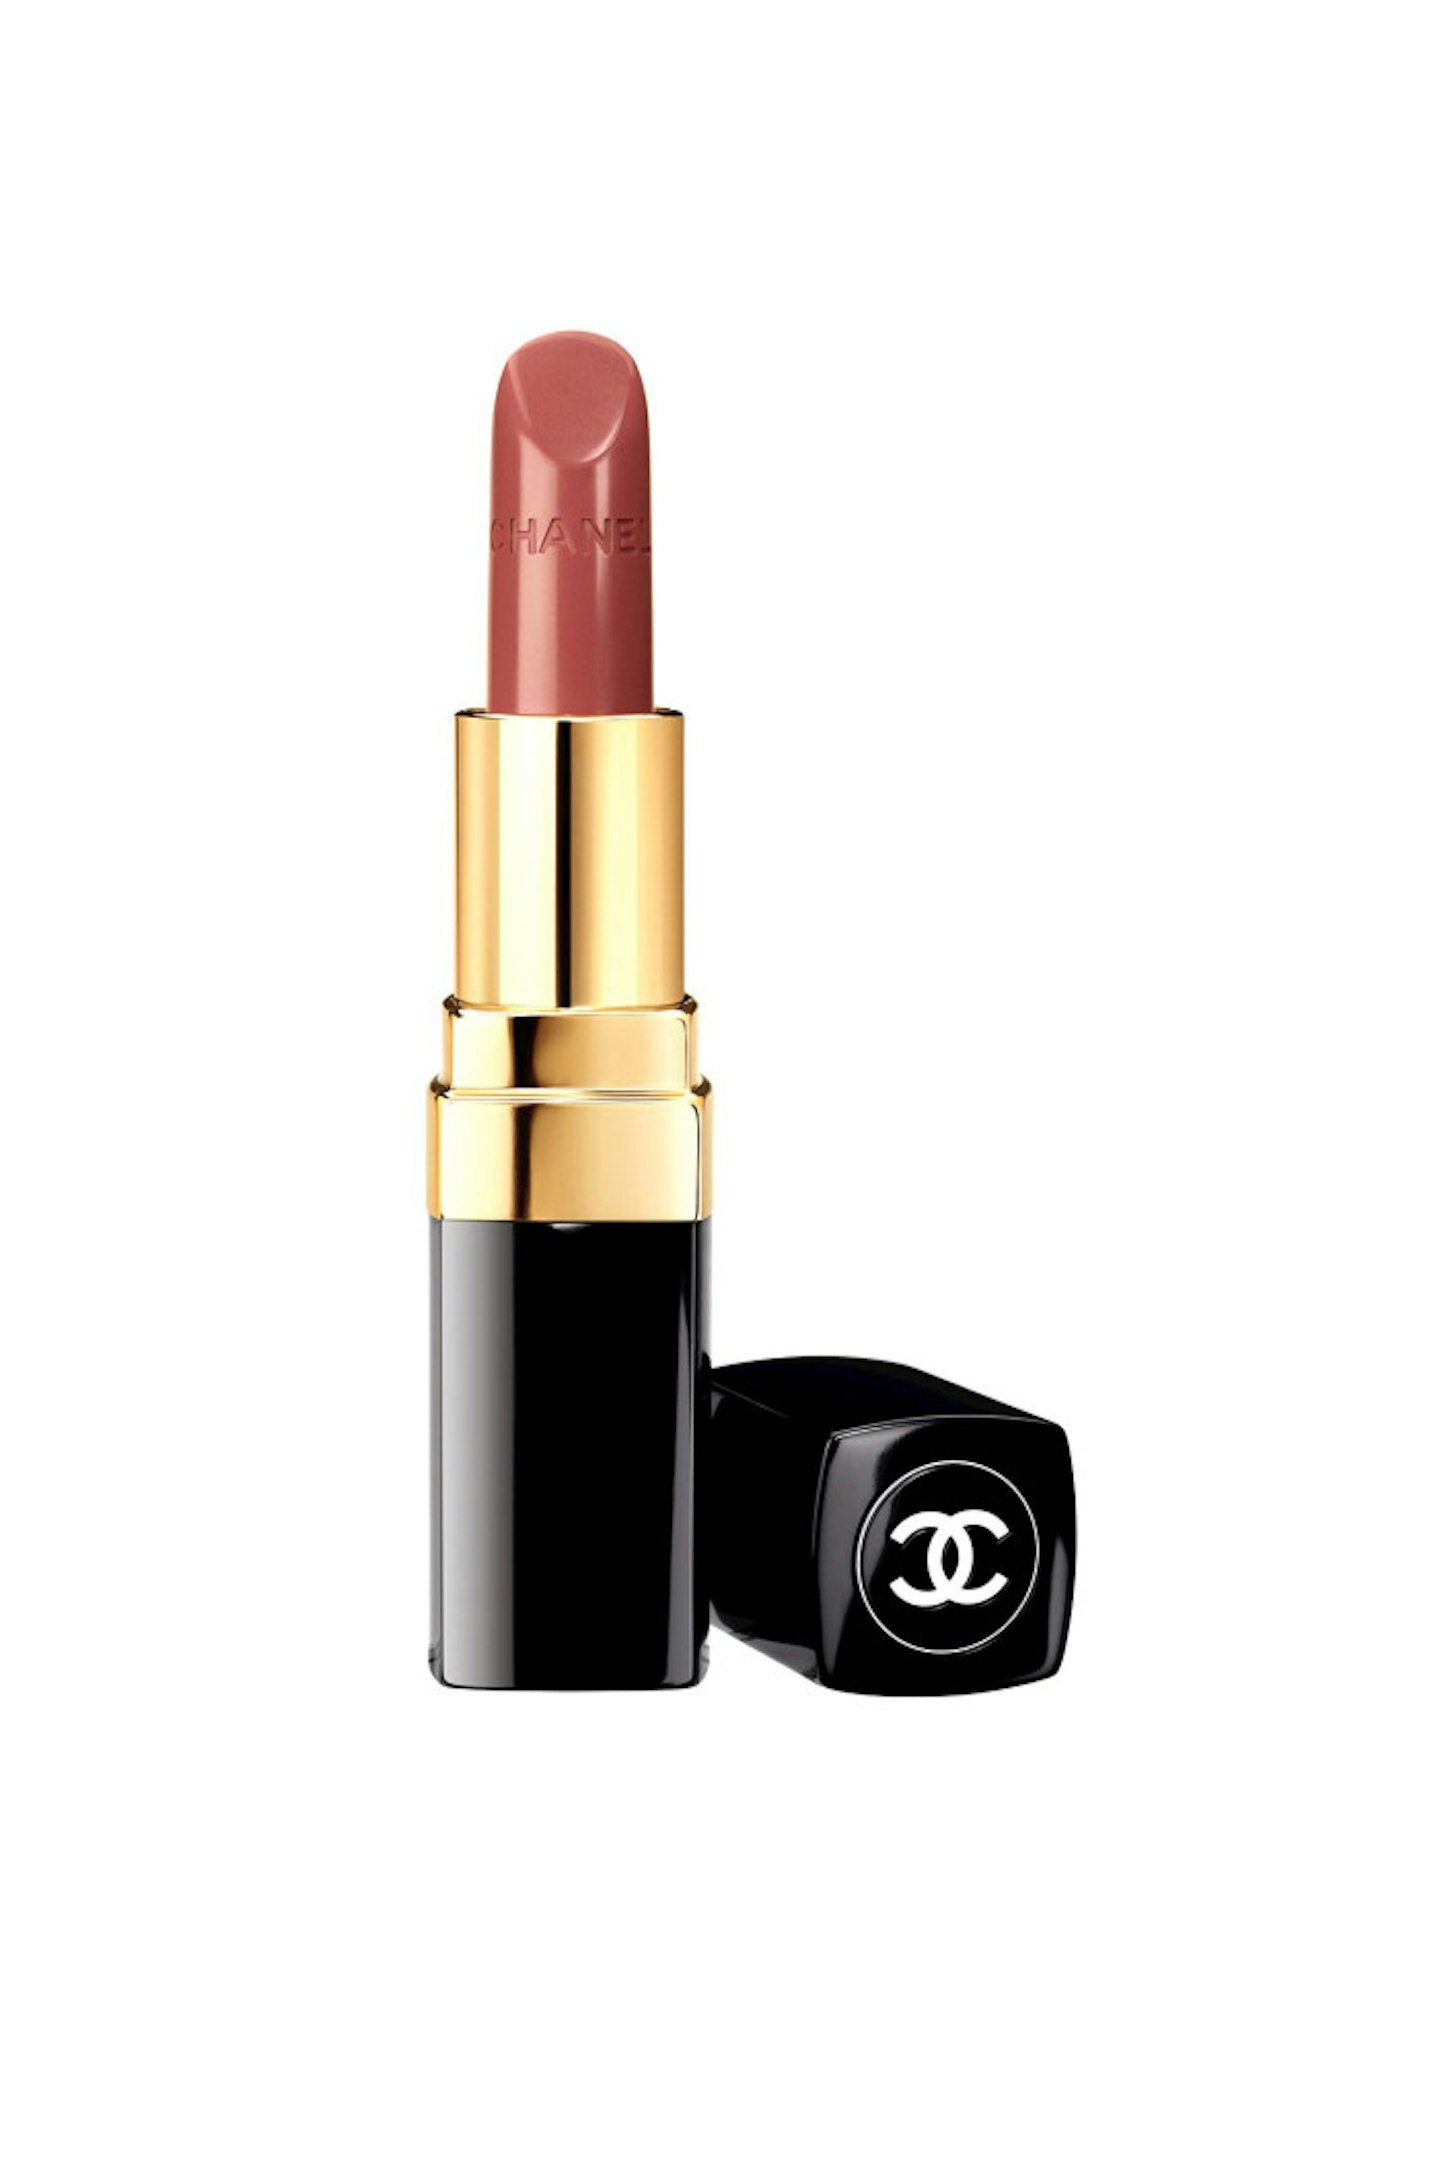 Chanel Rouge Coco Mademoiselle, £26.00